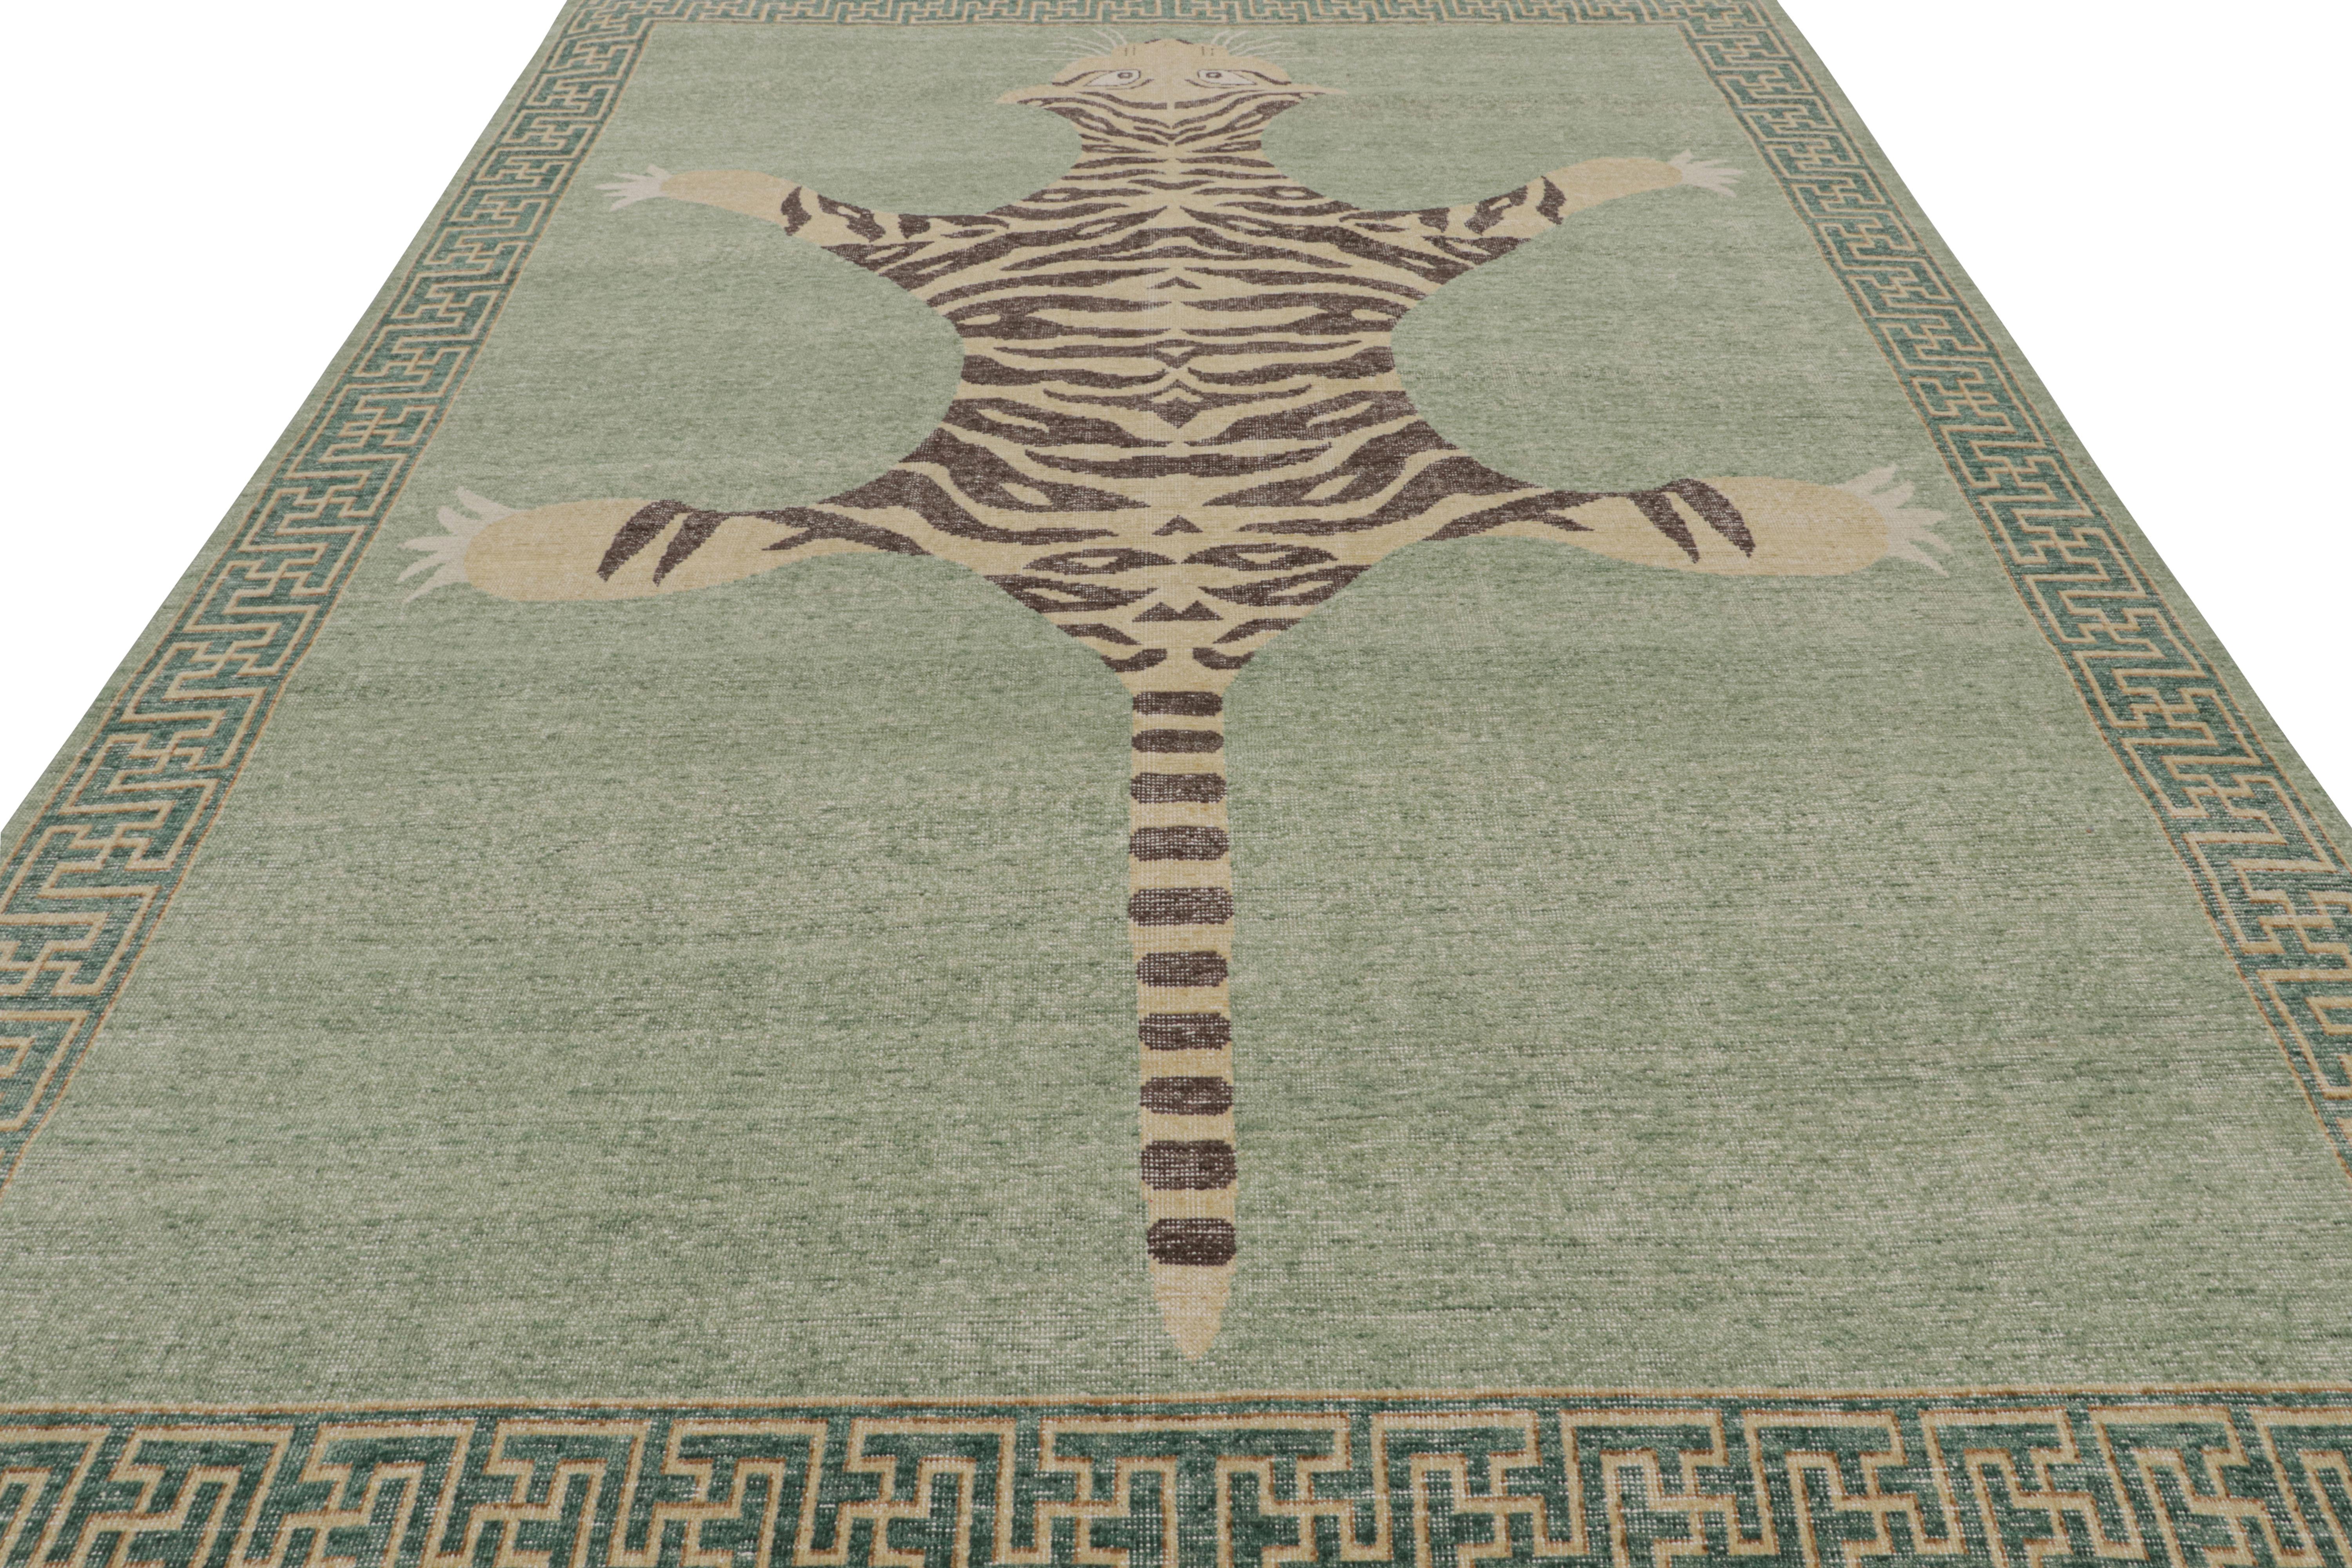 Indian Rug & Kilim’s Modern Tiger Skin Pictorial Rug in Green, Beige and Brown For Sale